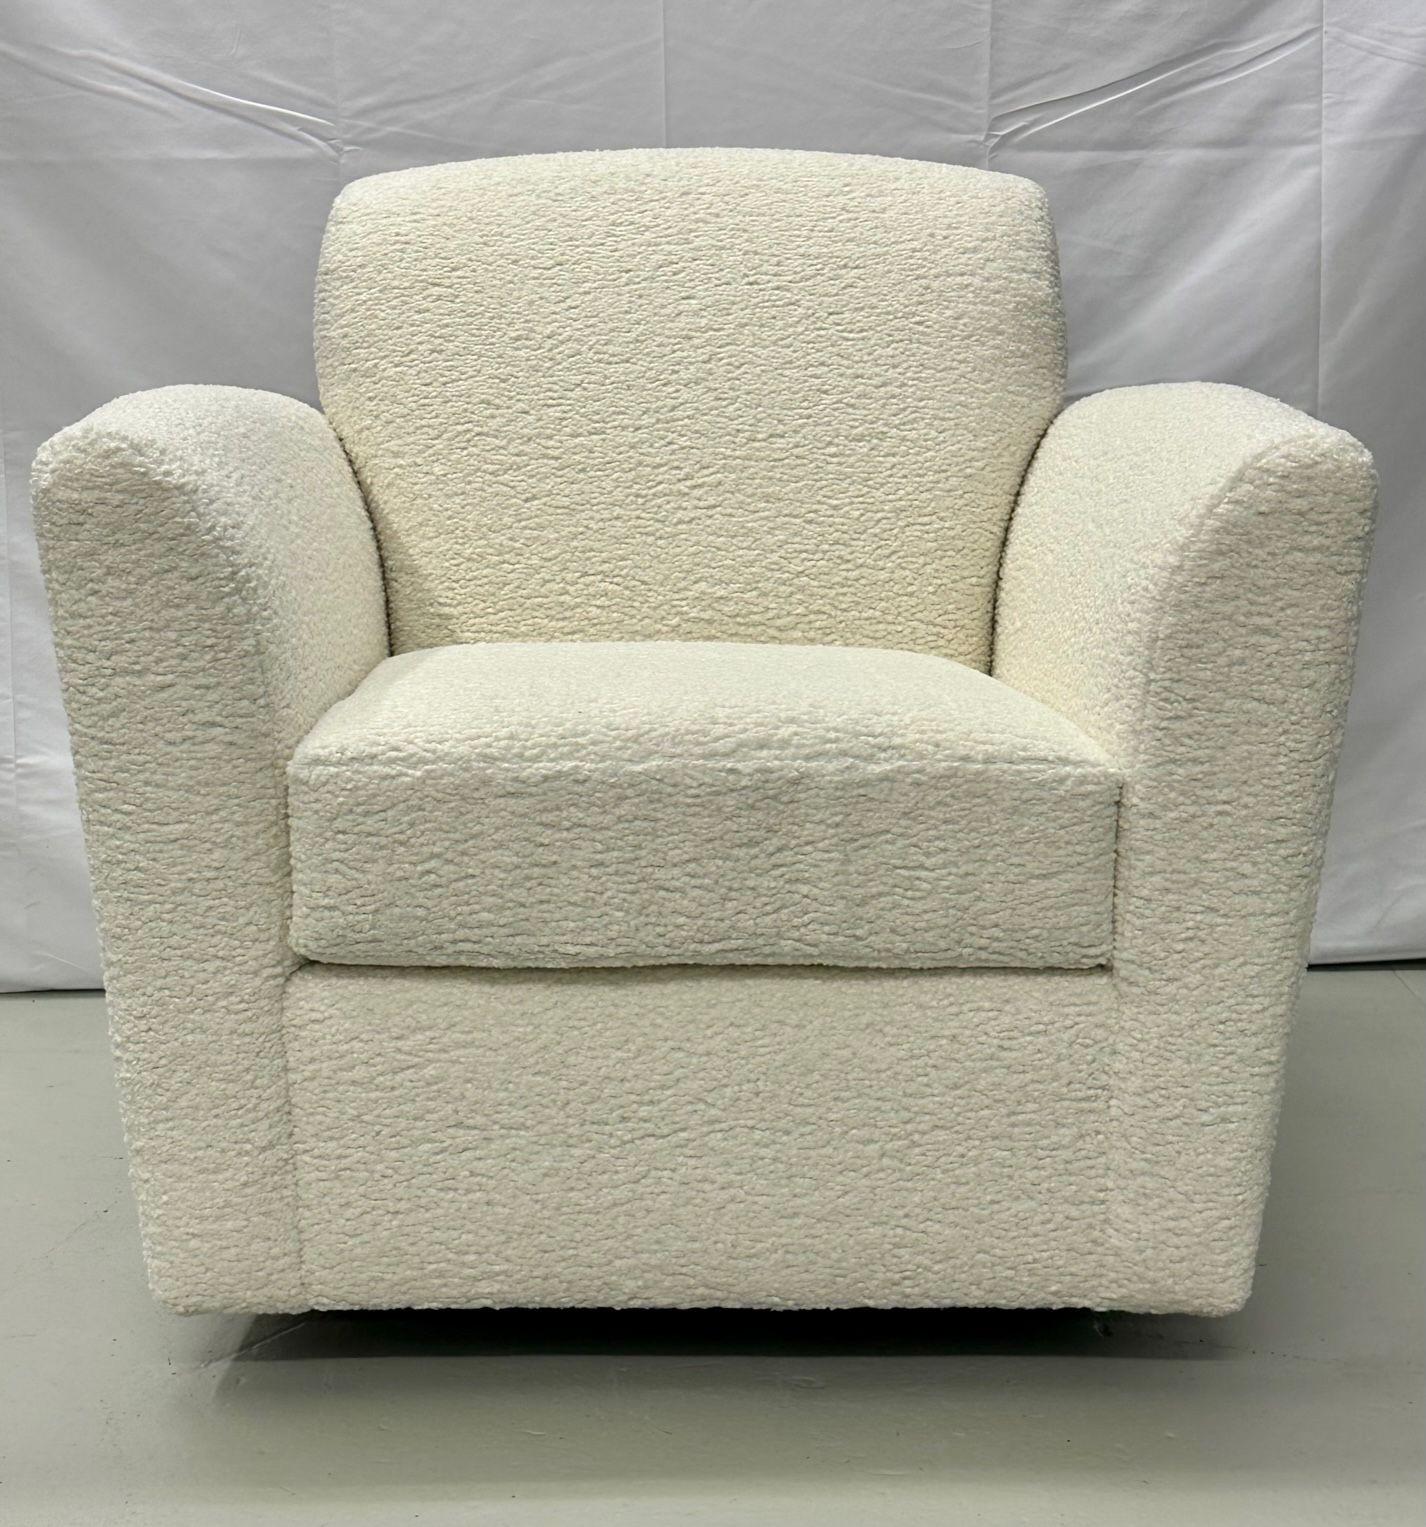 Pair of Mid-Century Modern Square White Boucle Rocking Lounge / Swivel Chairs For Sale 3